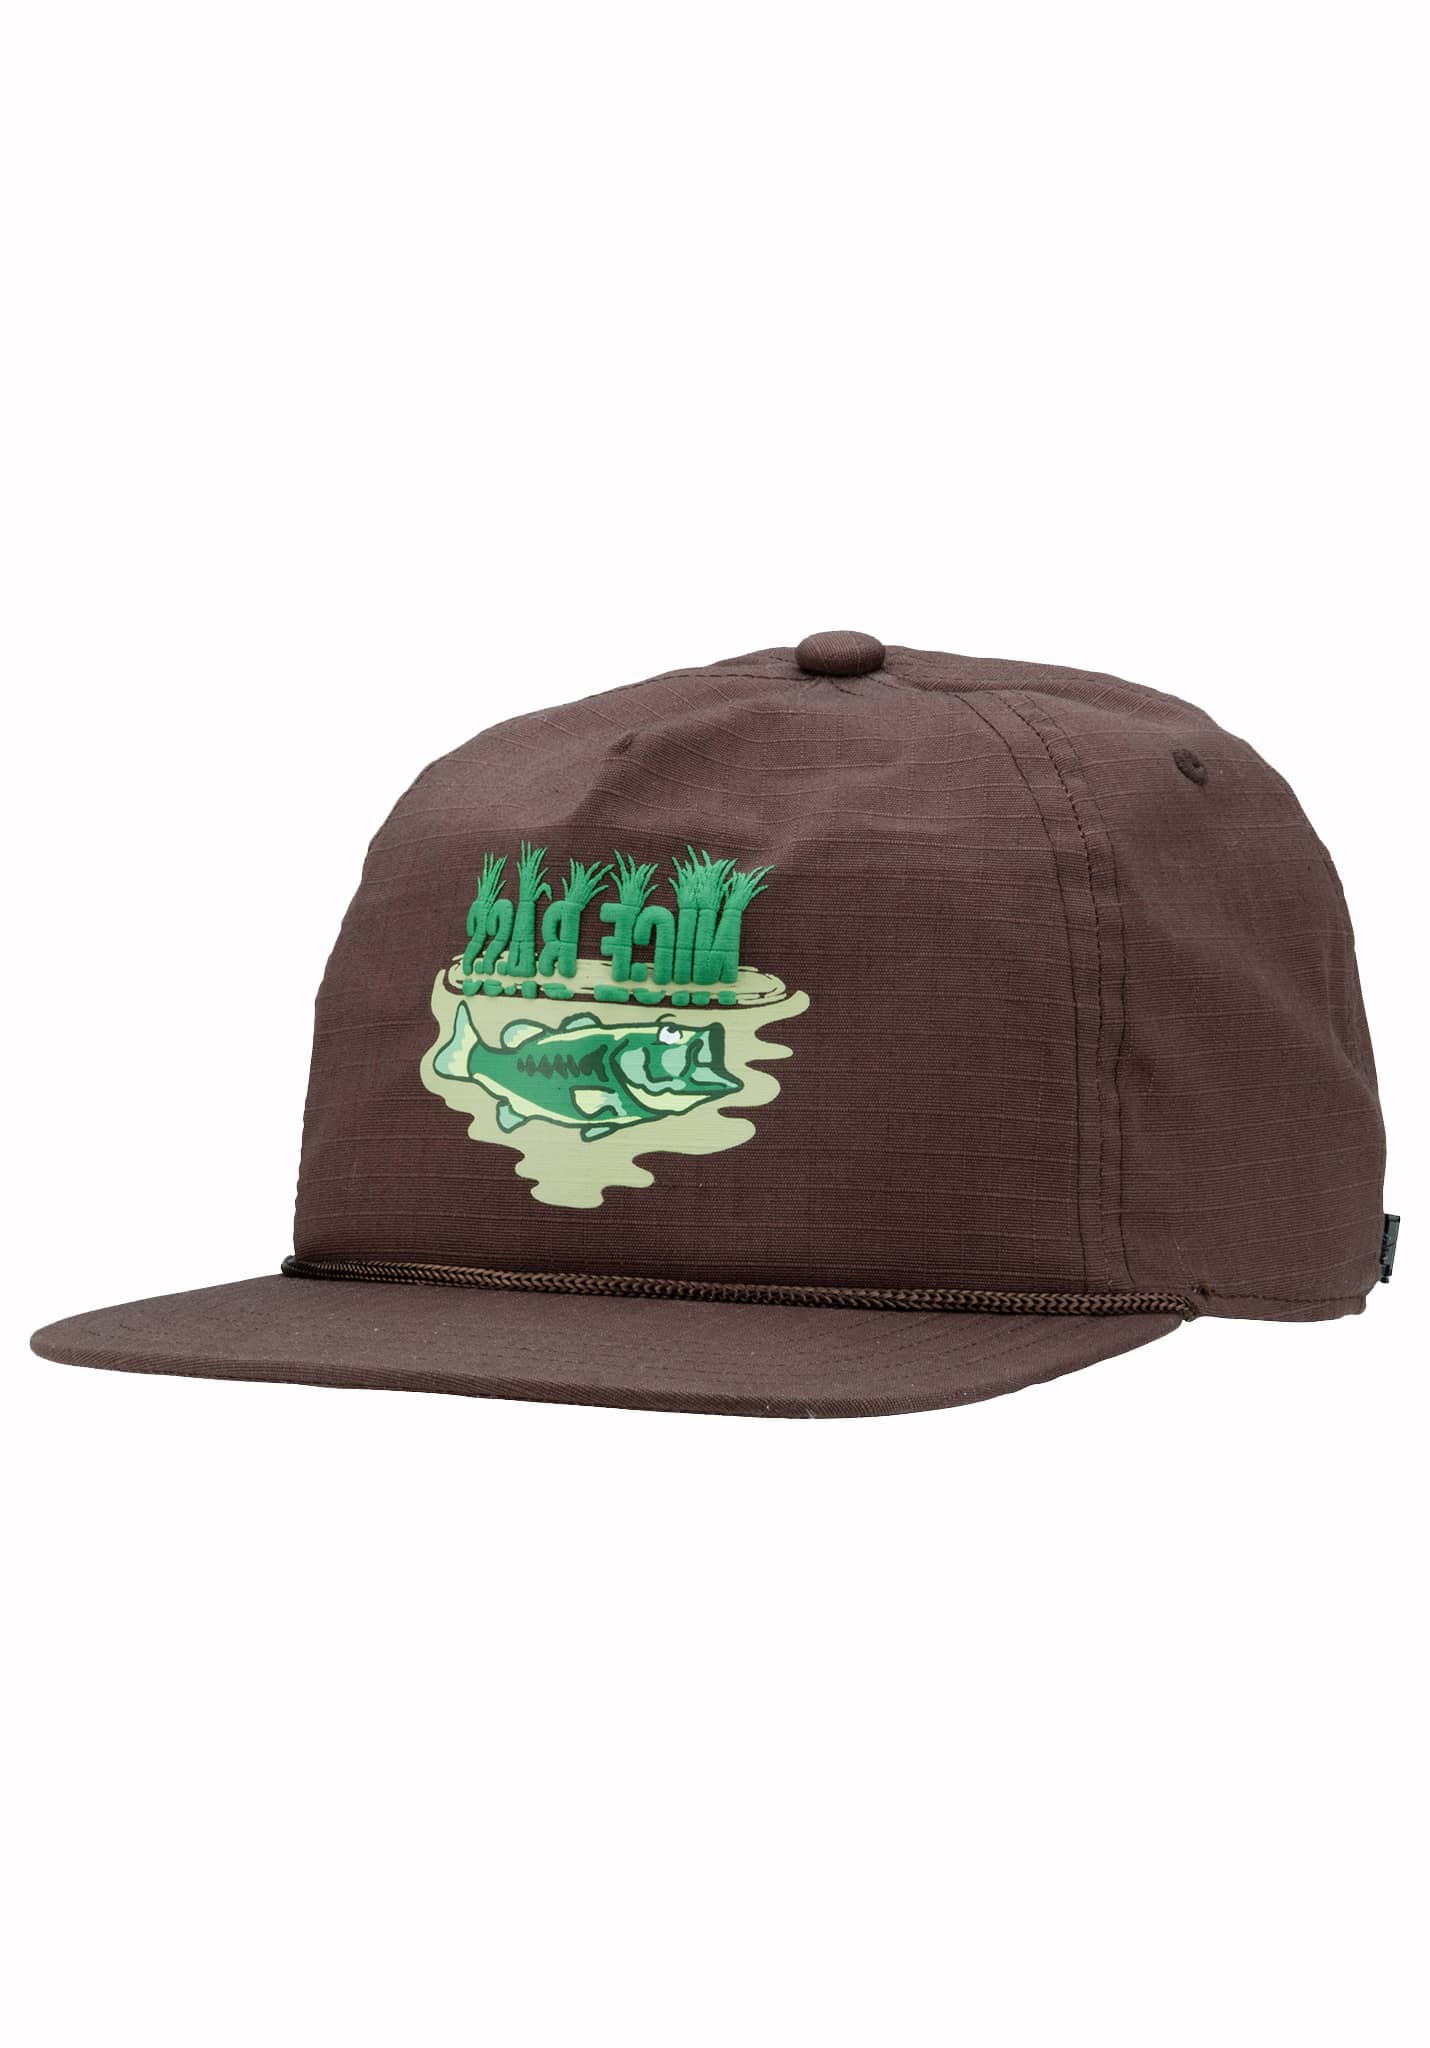 Coal The Field Strapback Cap brown One Size